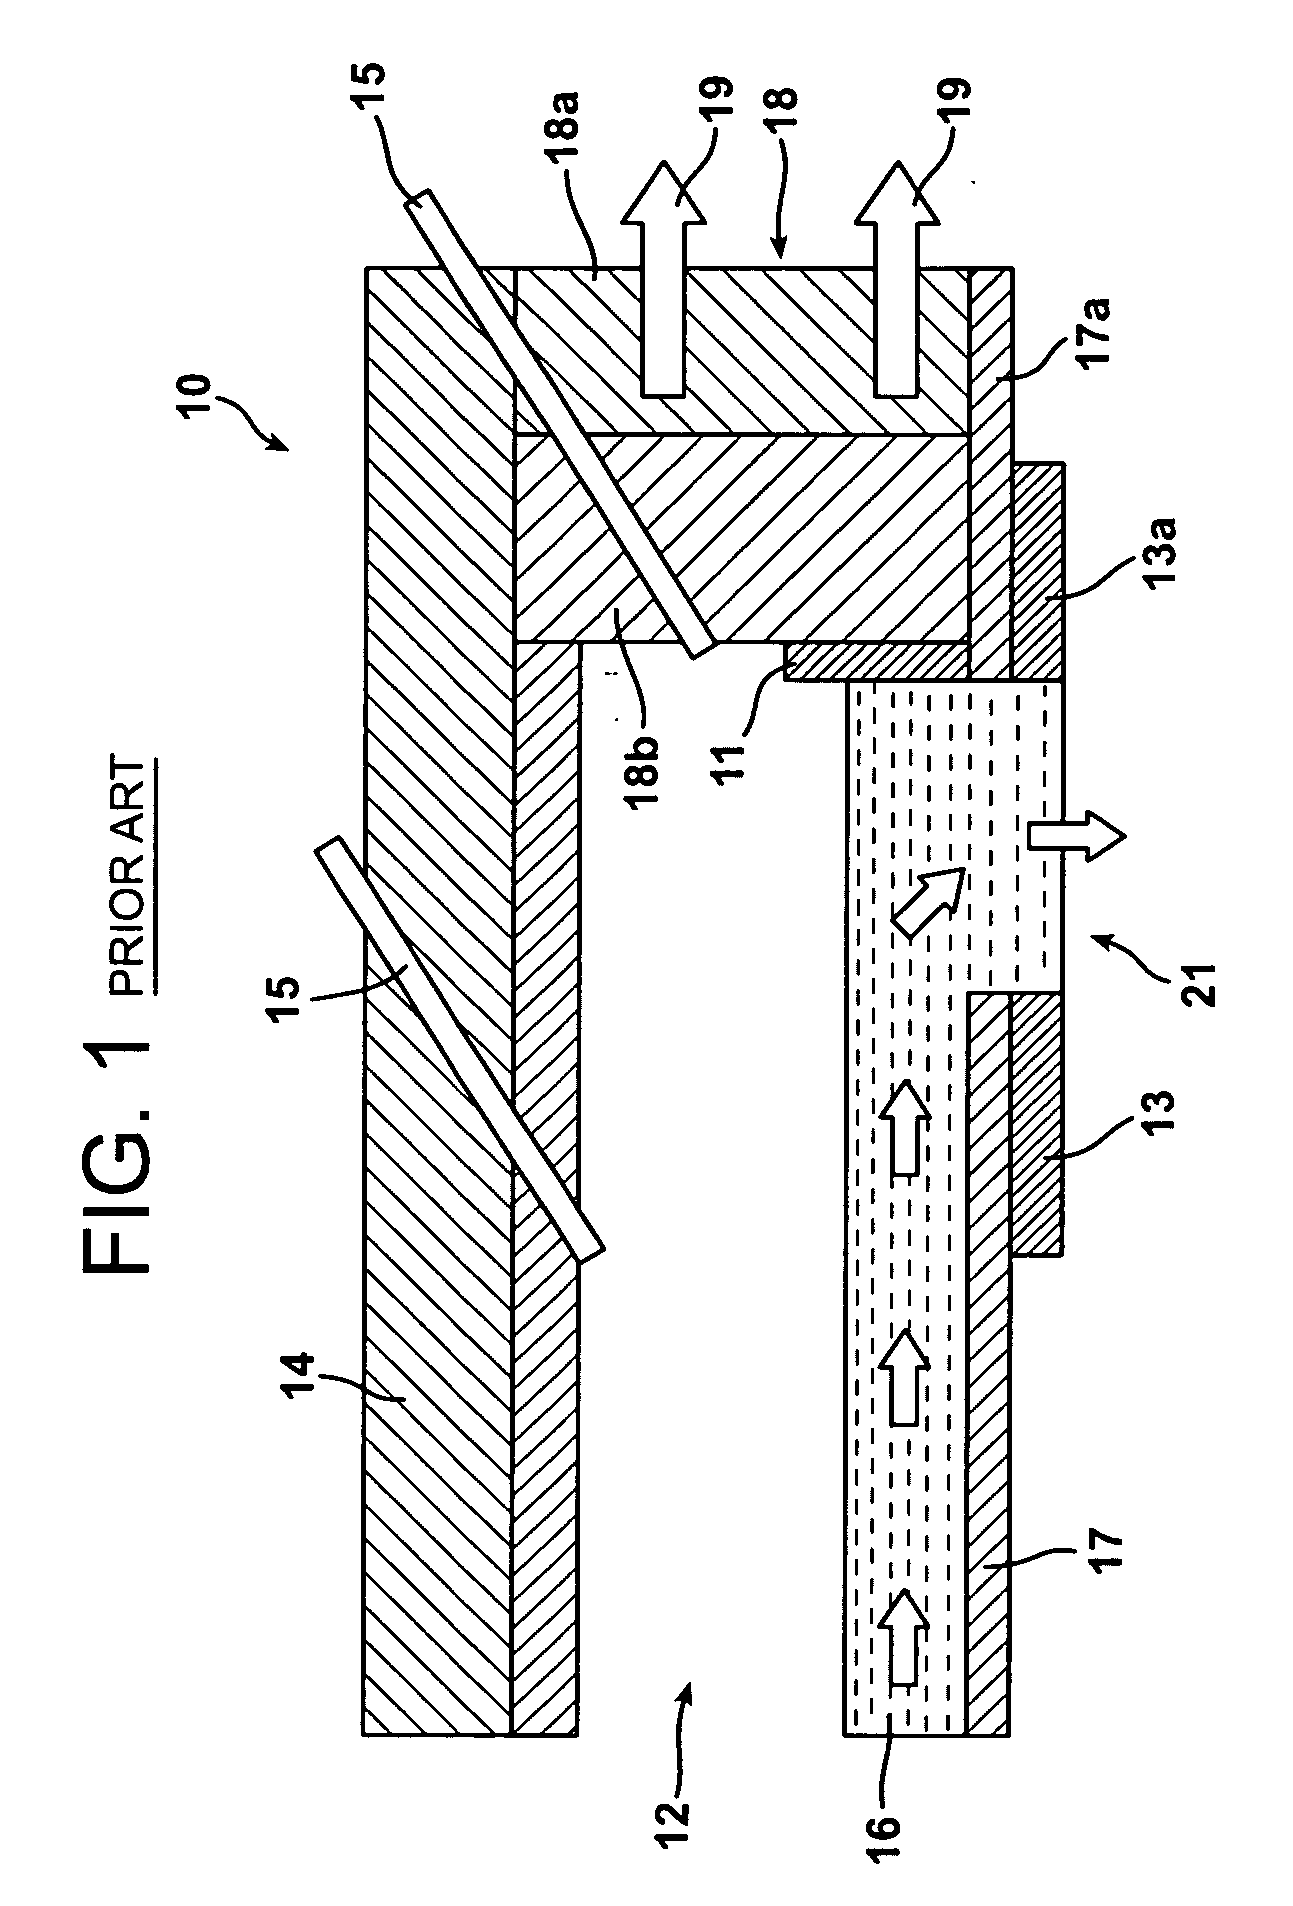 Apparatuses and methods for controlling the temperature of glass forming materials in forehearths